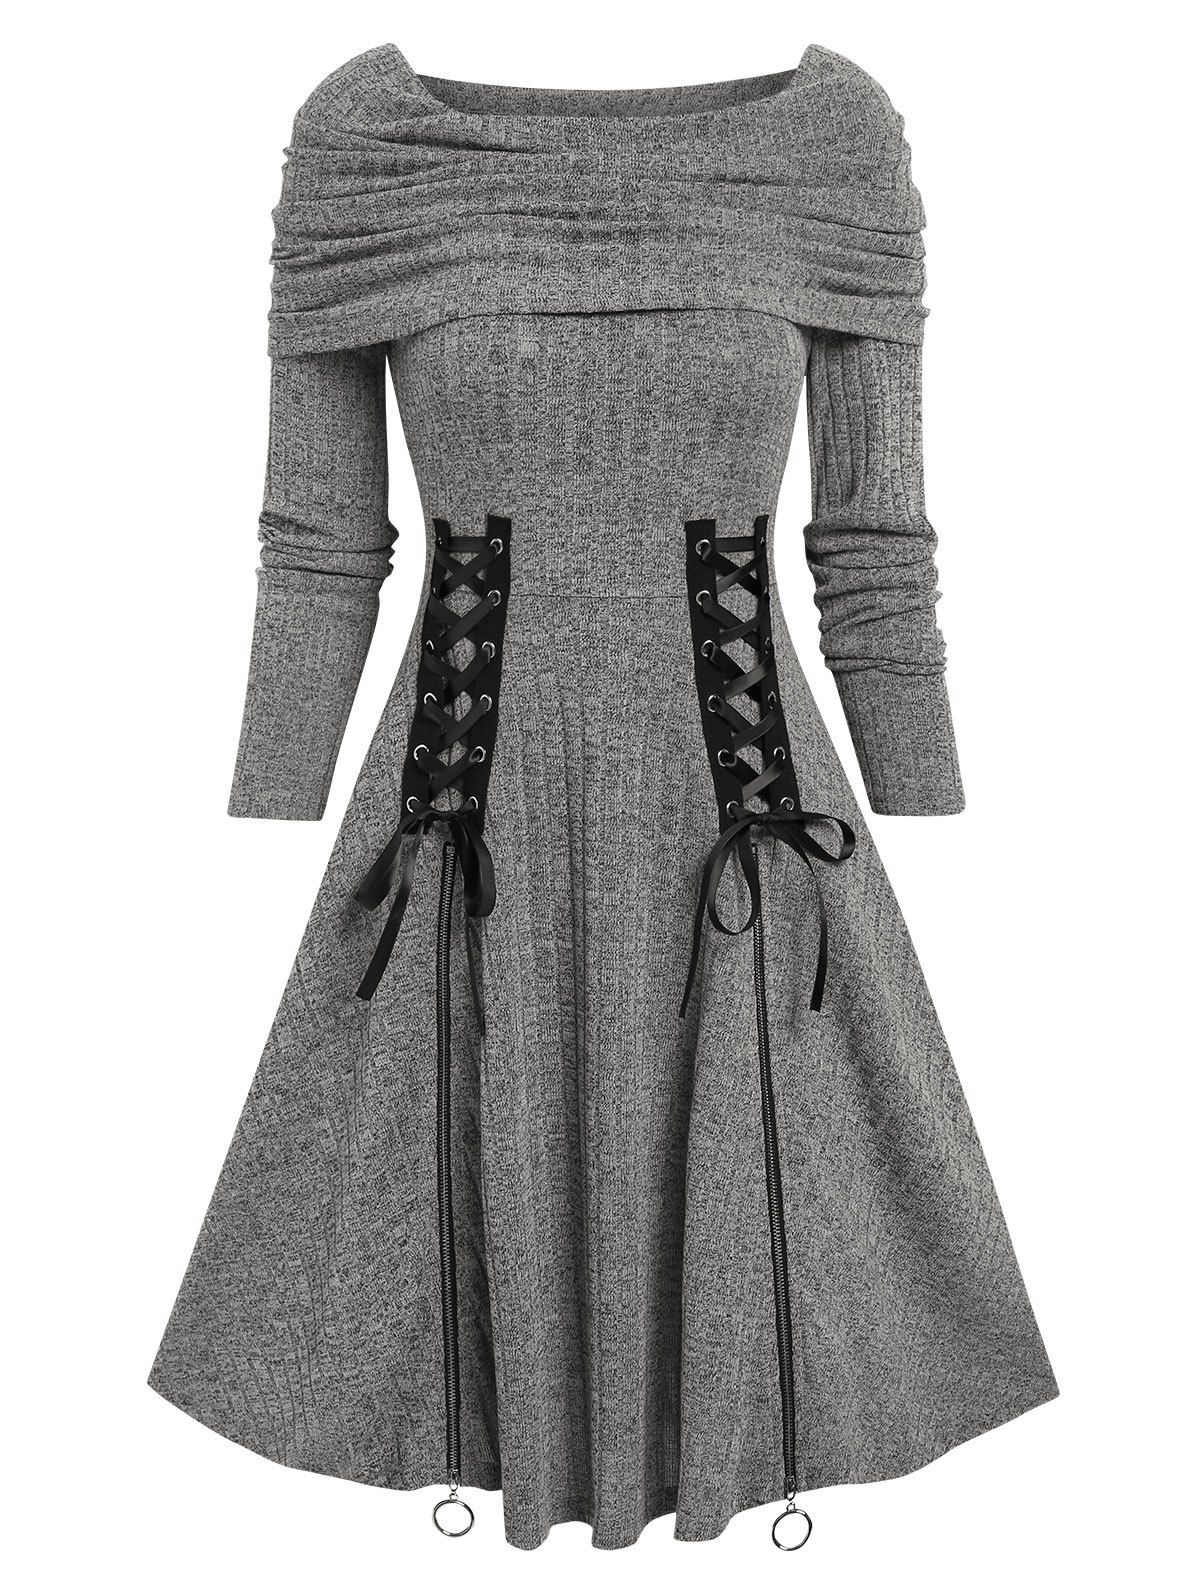 Convertible Foldover Boat Neck Lace Up Zippered Dress - GRAY L